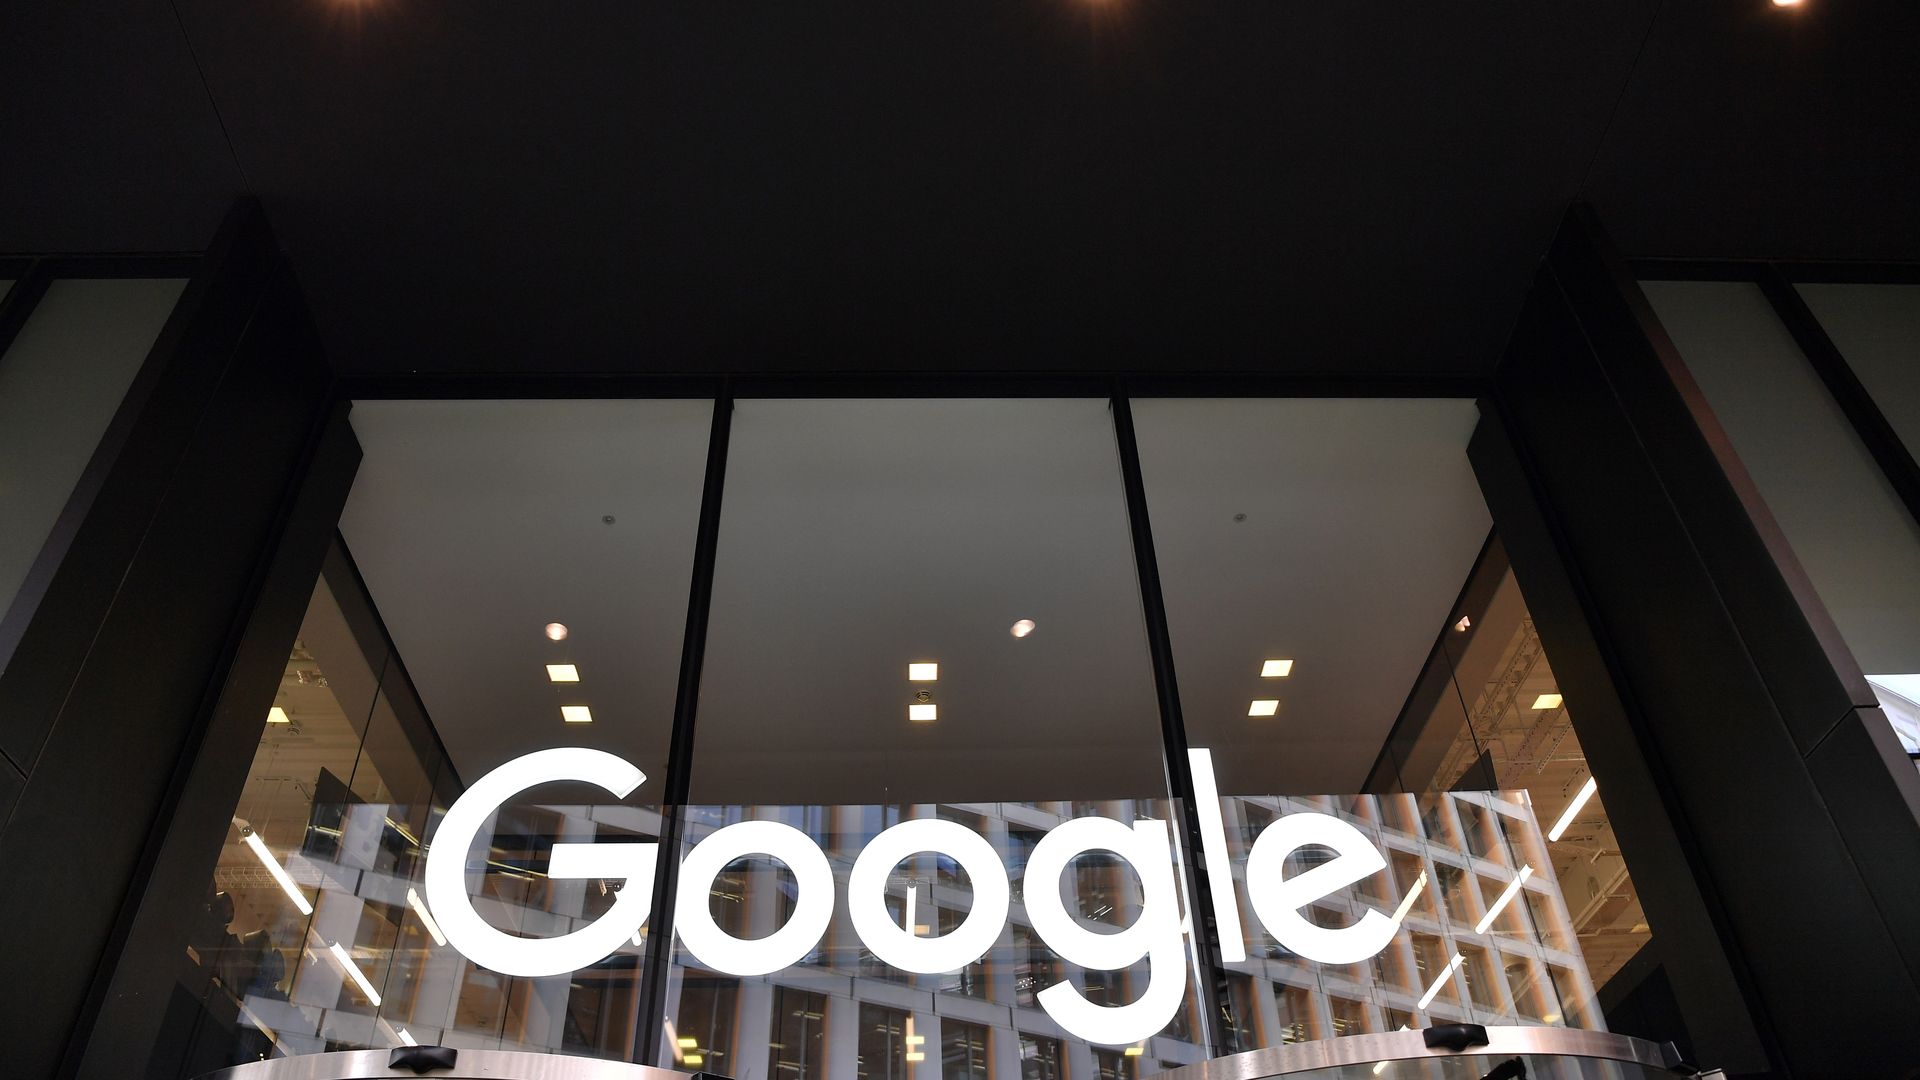 In this image, the white Google logo is seen at the bottom of three large glass windows on the side of a building. 